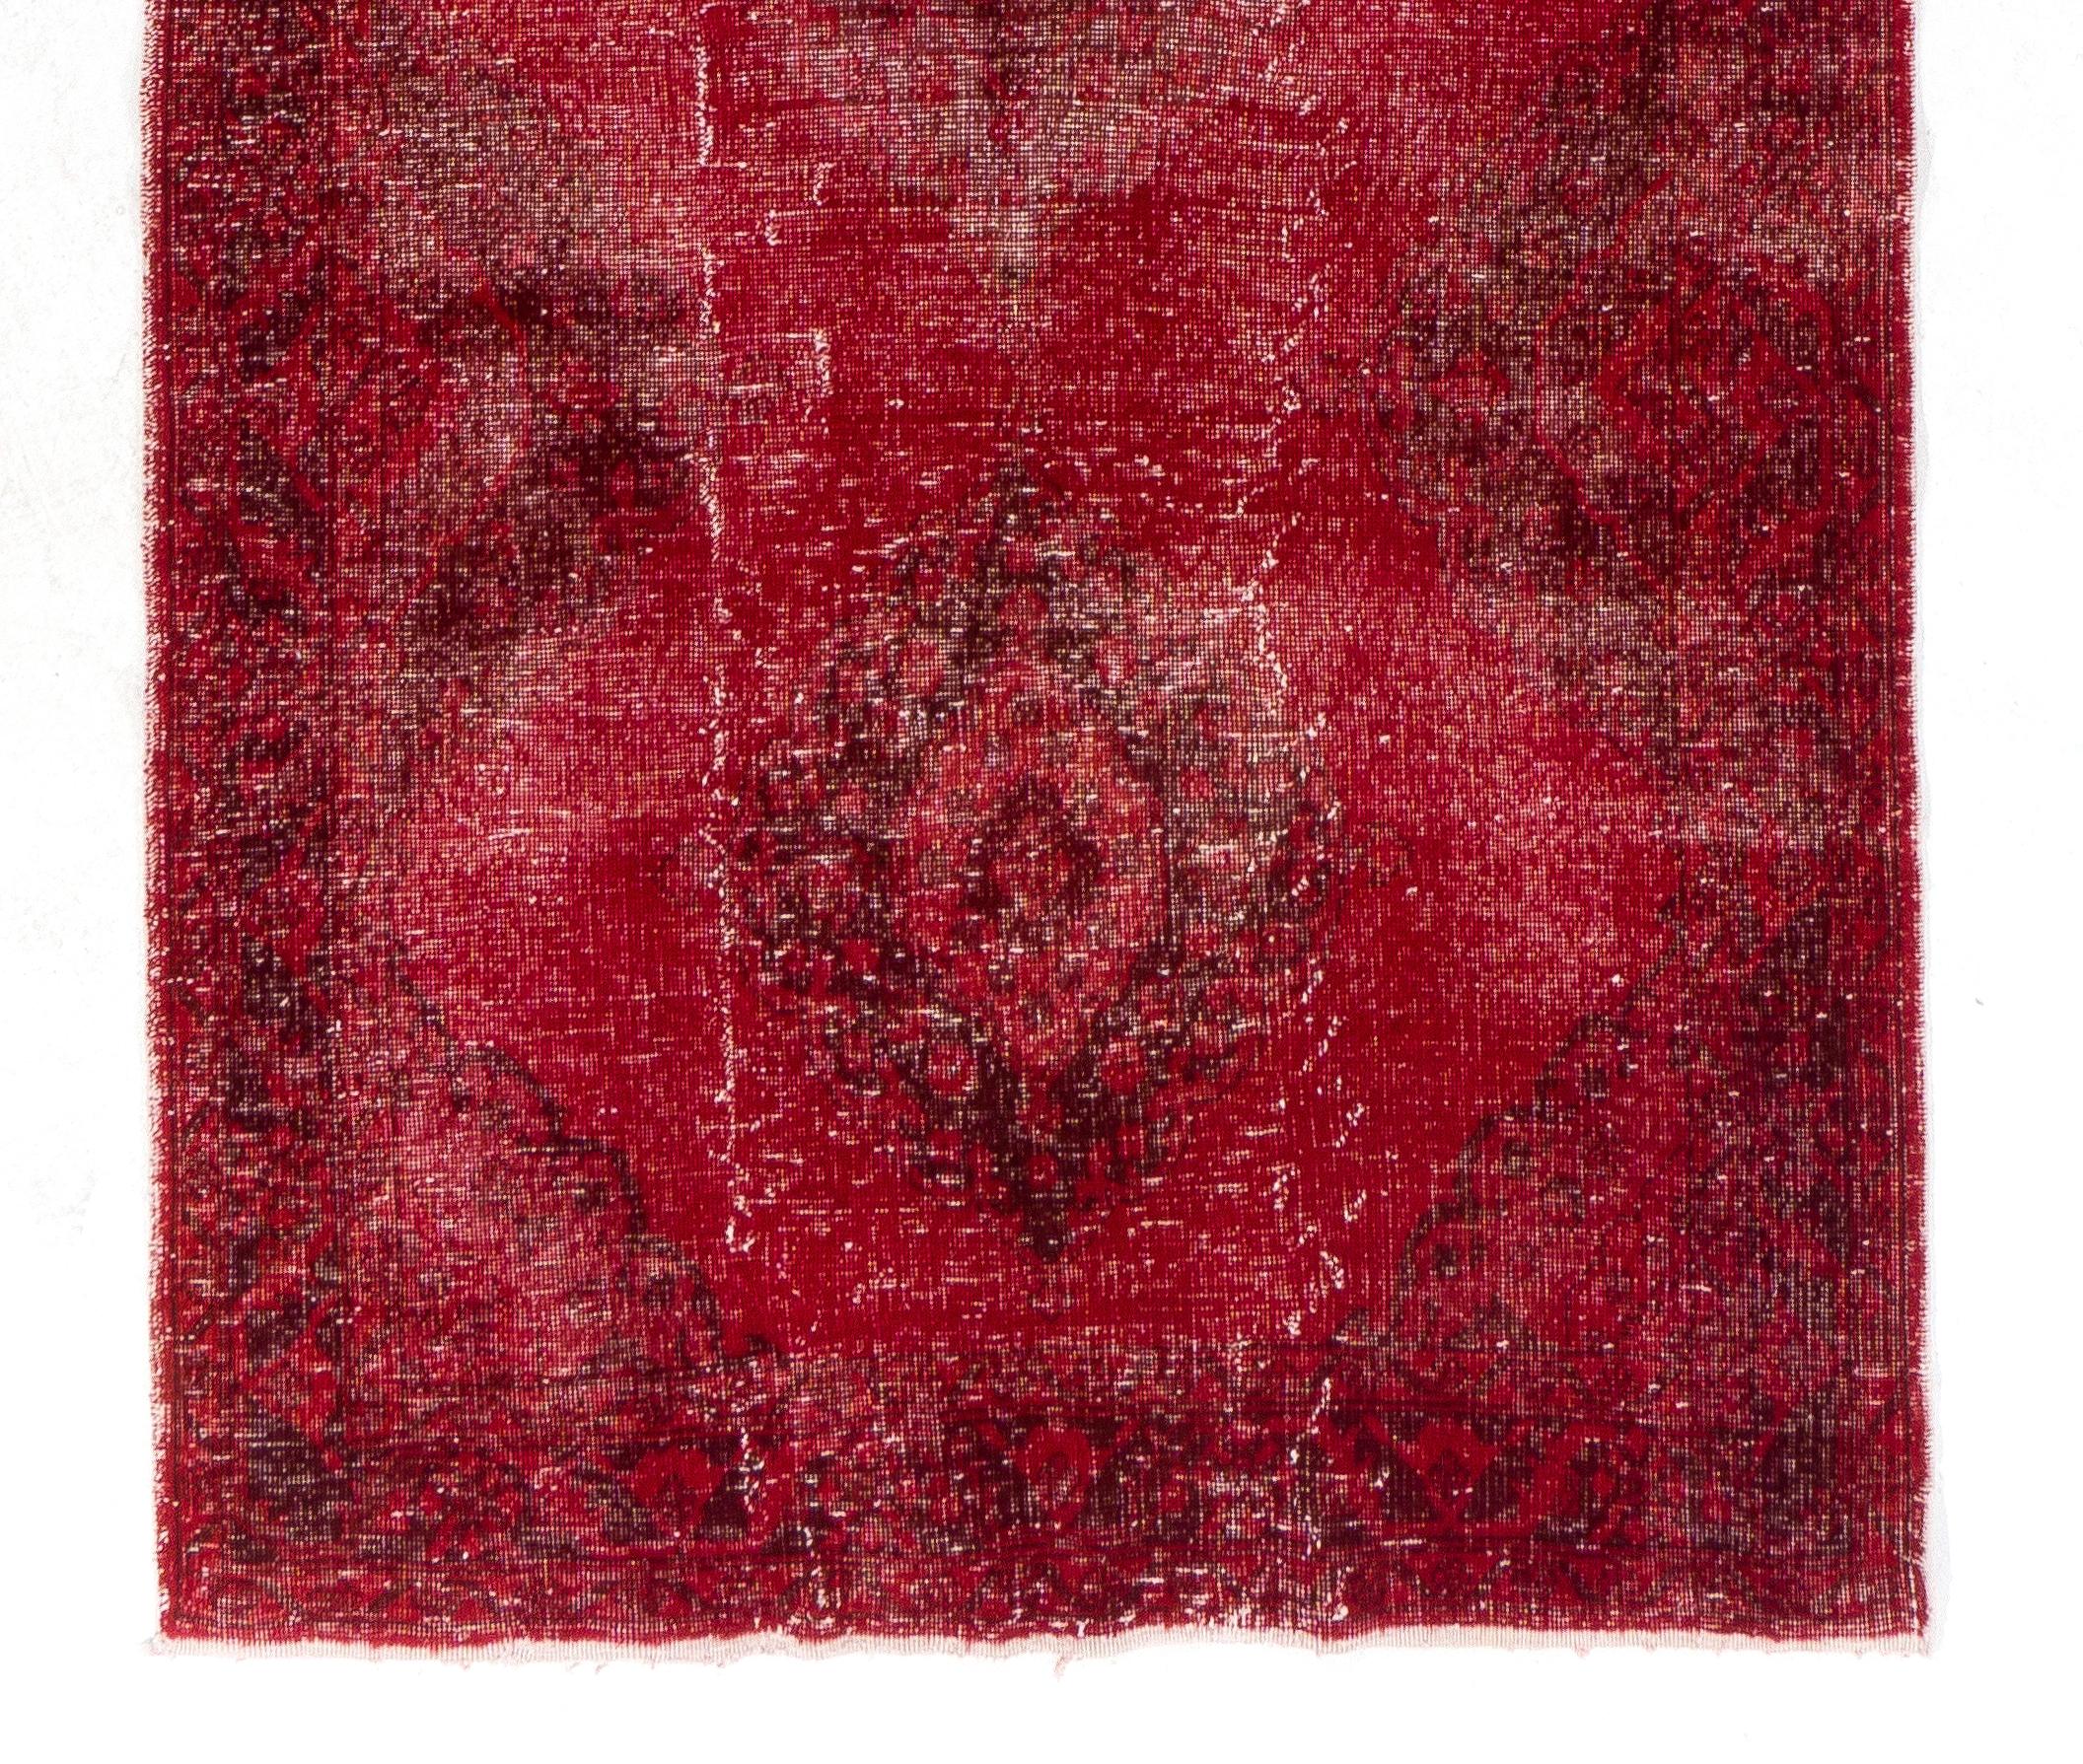 Hand-Knotted 4.8x13 Ft Distressed Vintage Turkish Runner Rug in Red. Modern Handmade Carpet For Sale